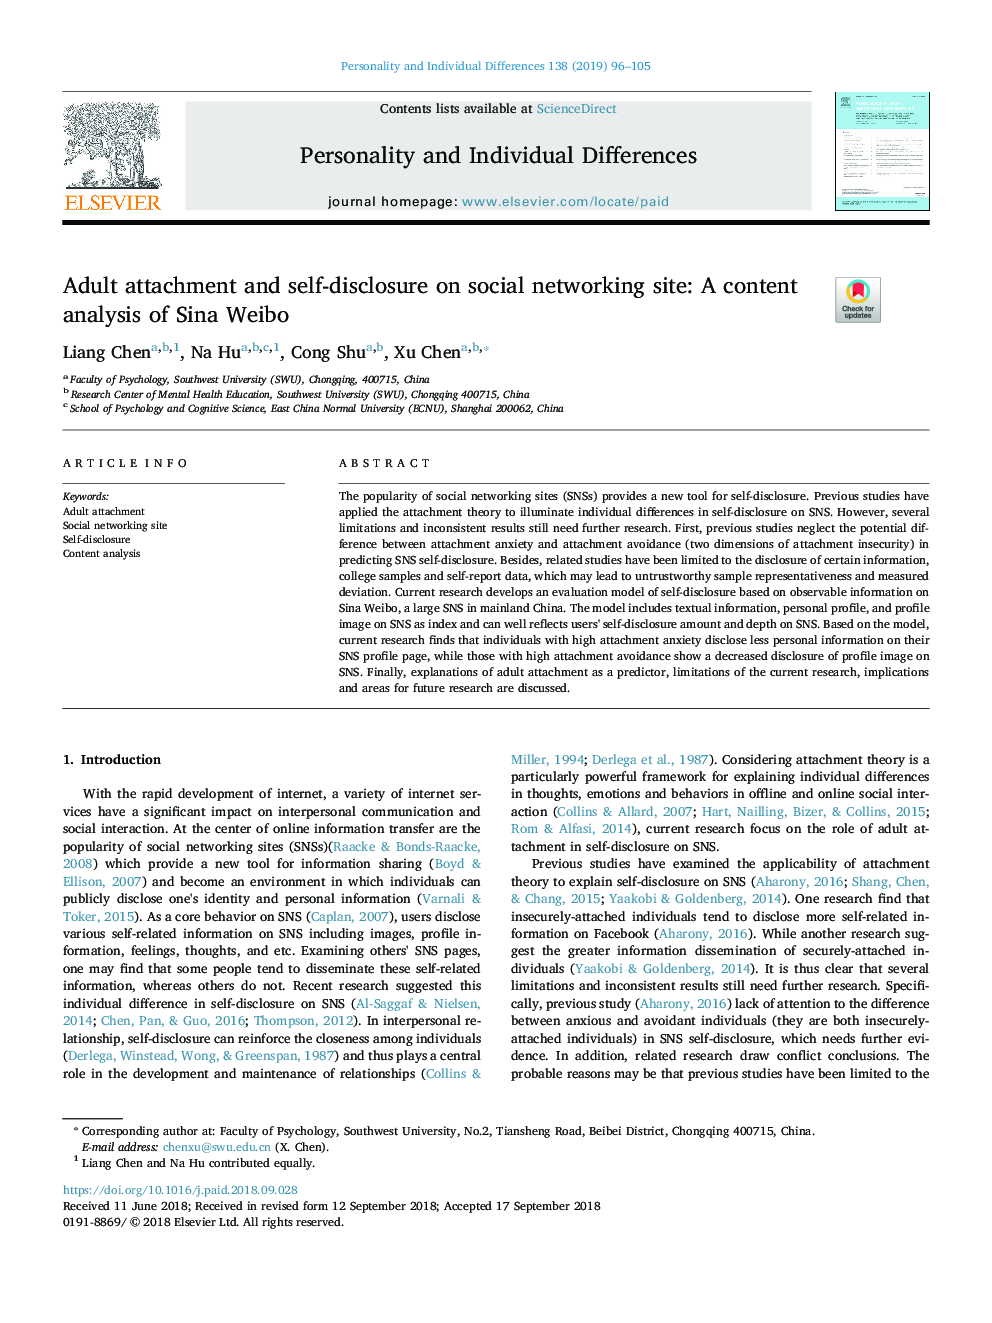 Adult attachment and self-disclosure on social networking site: A content analysis of Sina Weibo